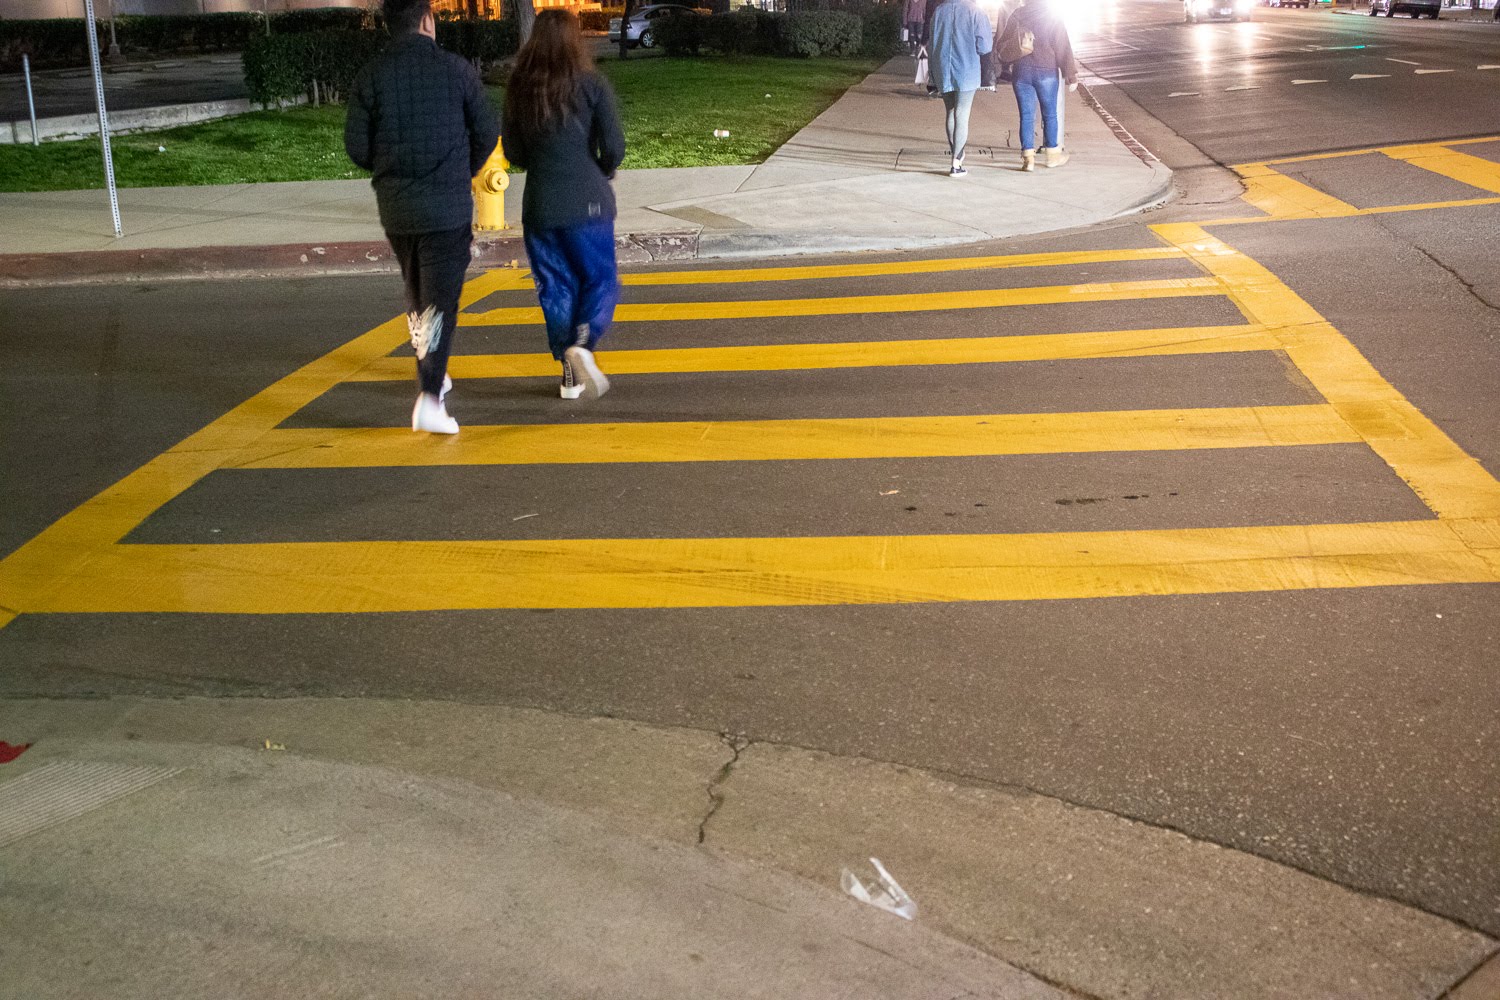 10/2 Duluth, GA – Fatal Pedestrian Hit-and-Run Accident on Buford Hwy